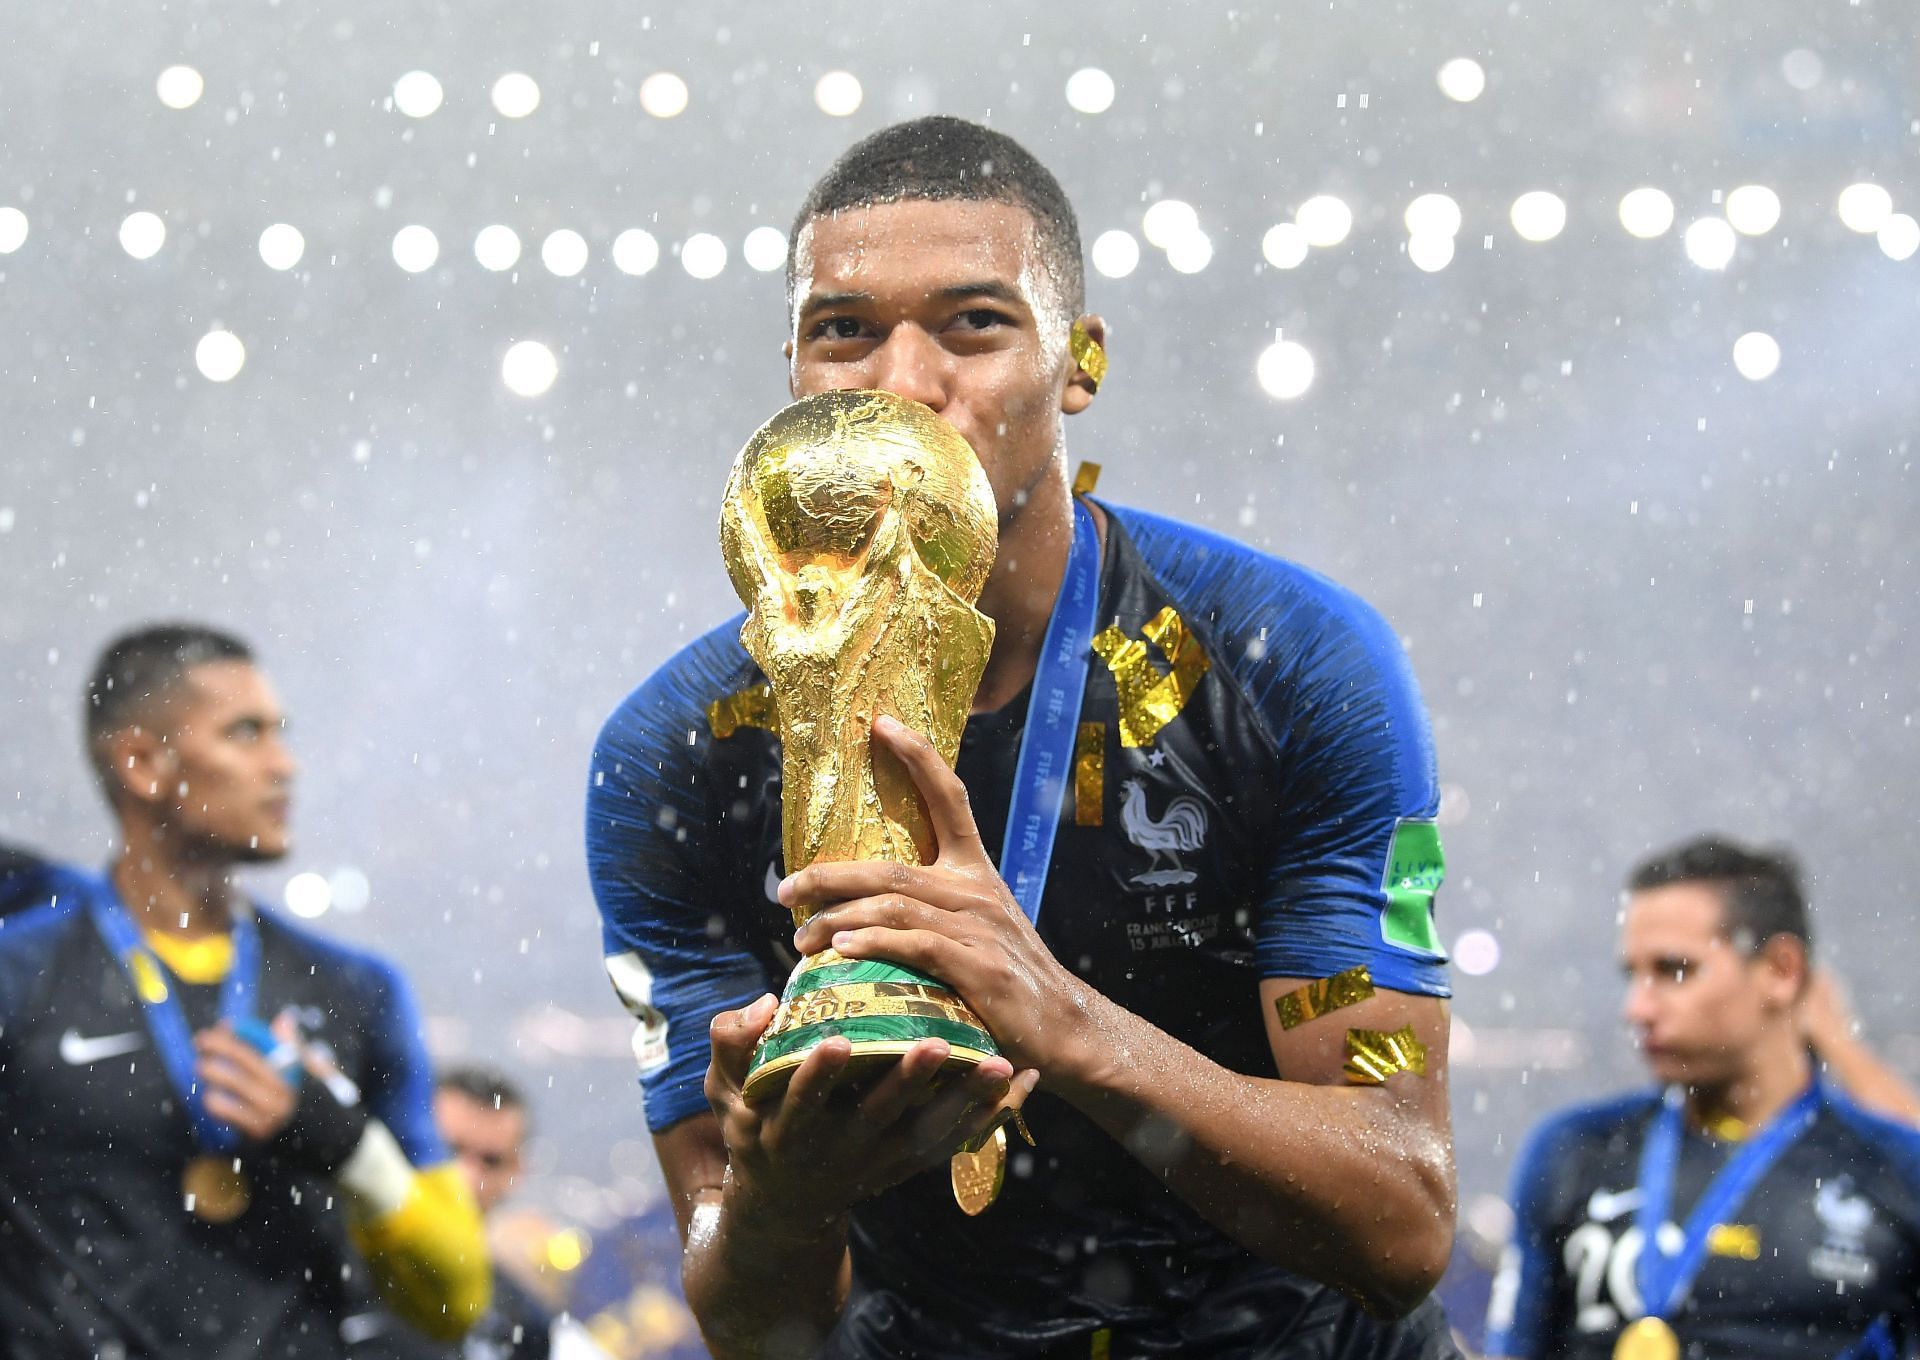 Can Mbappe conjure up more World Cup magic?